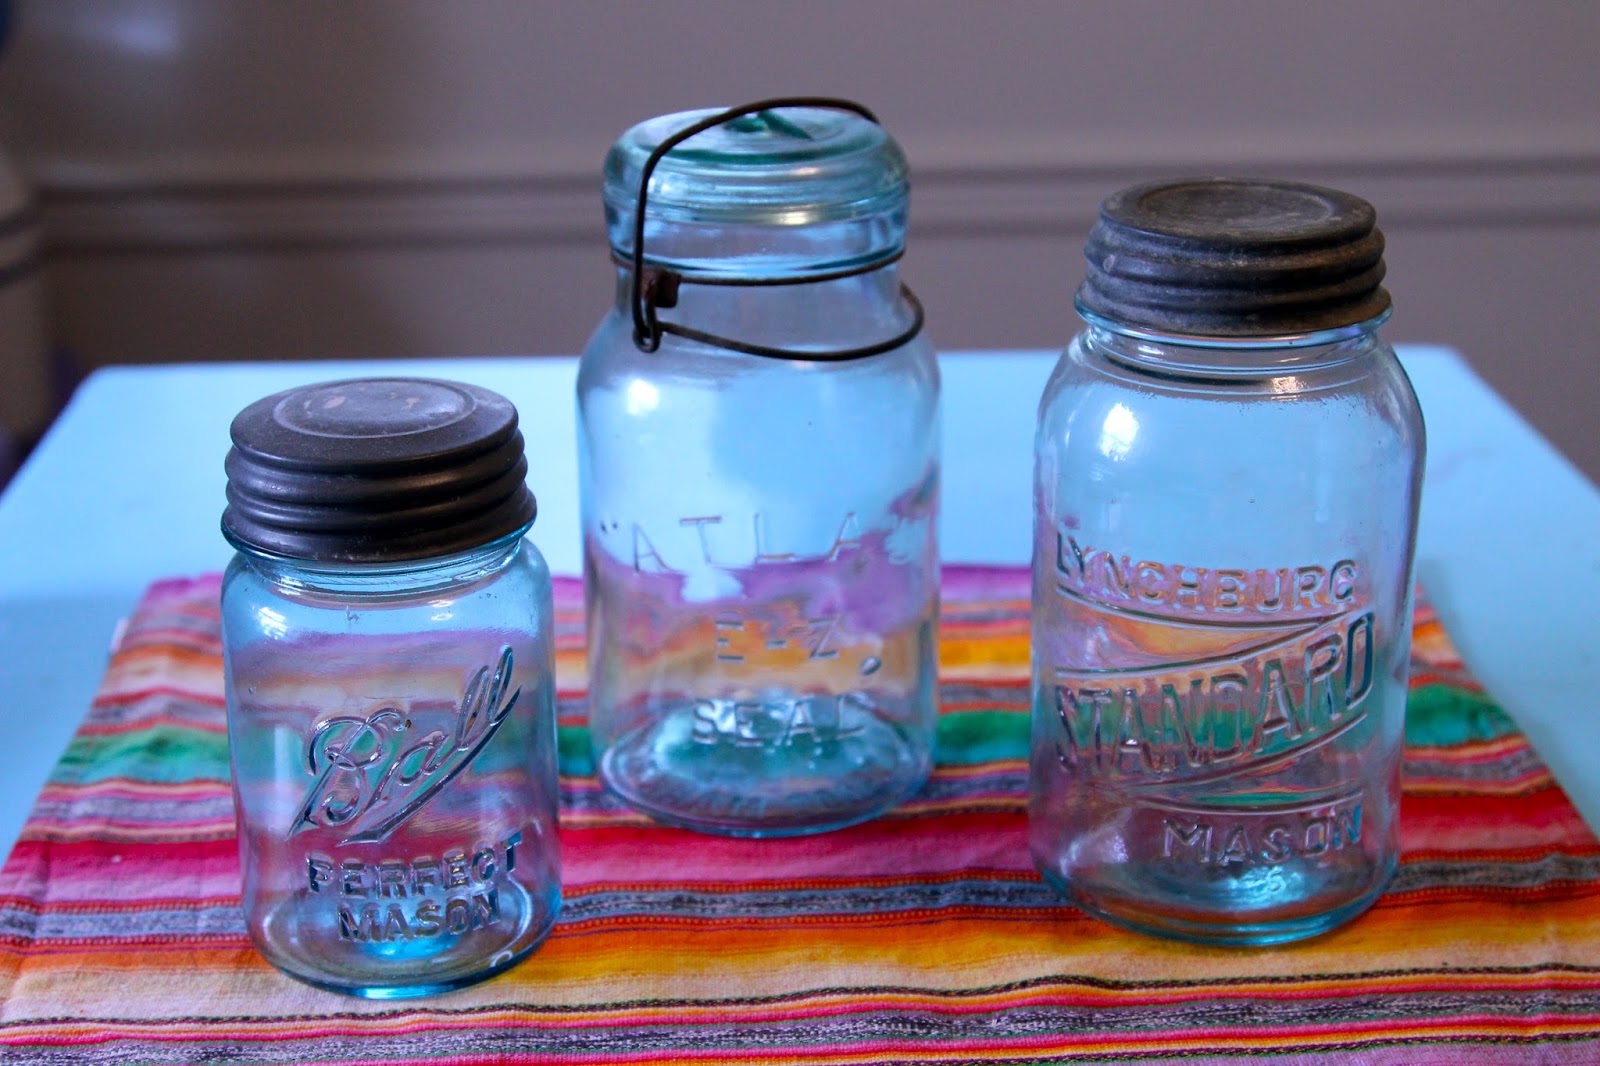 How do you tell how old Ball jars are?